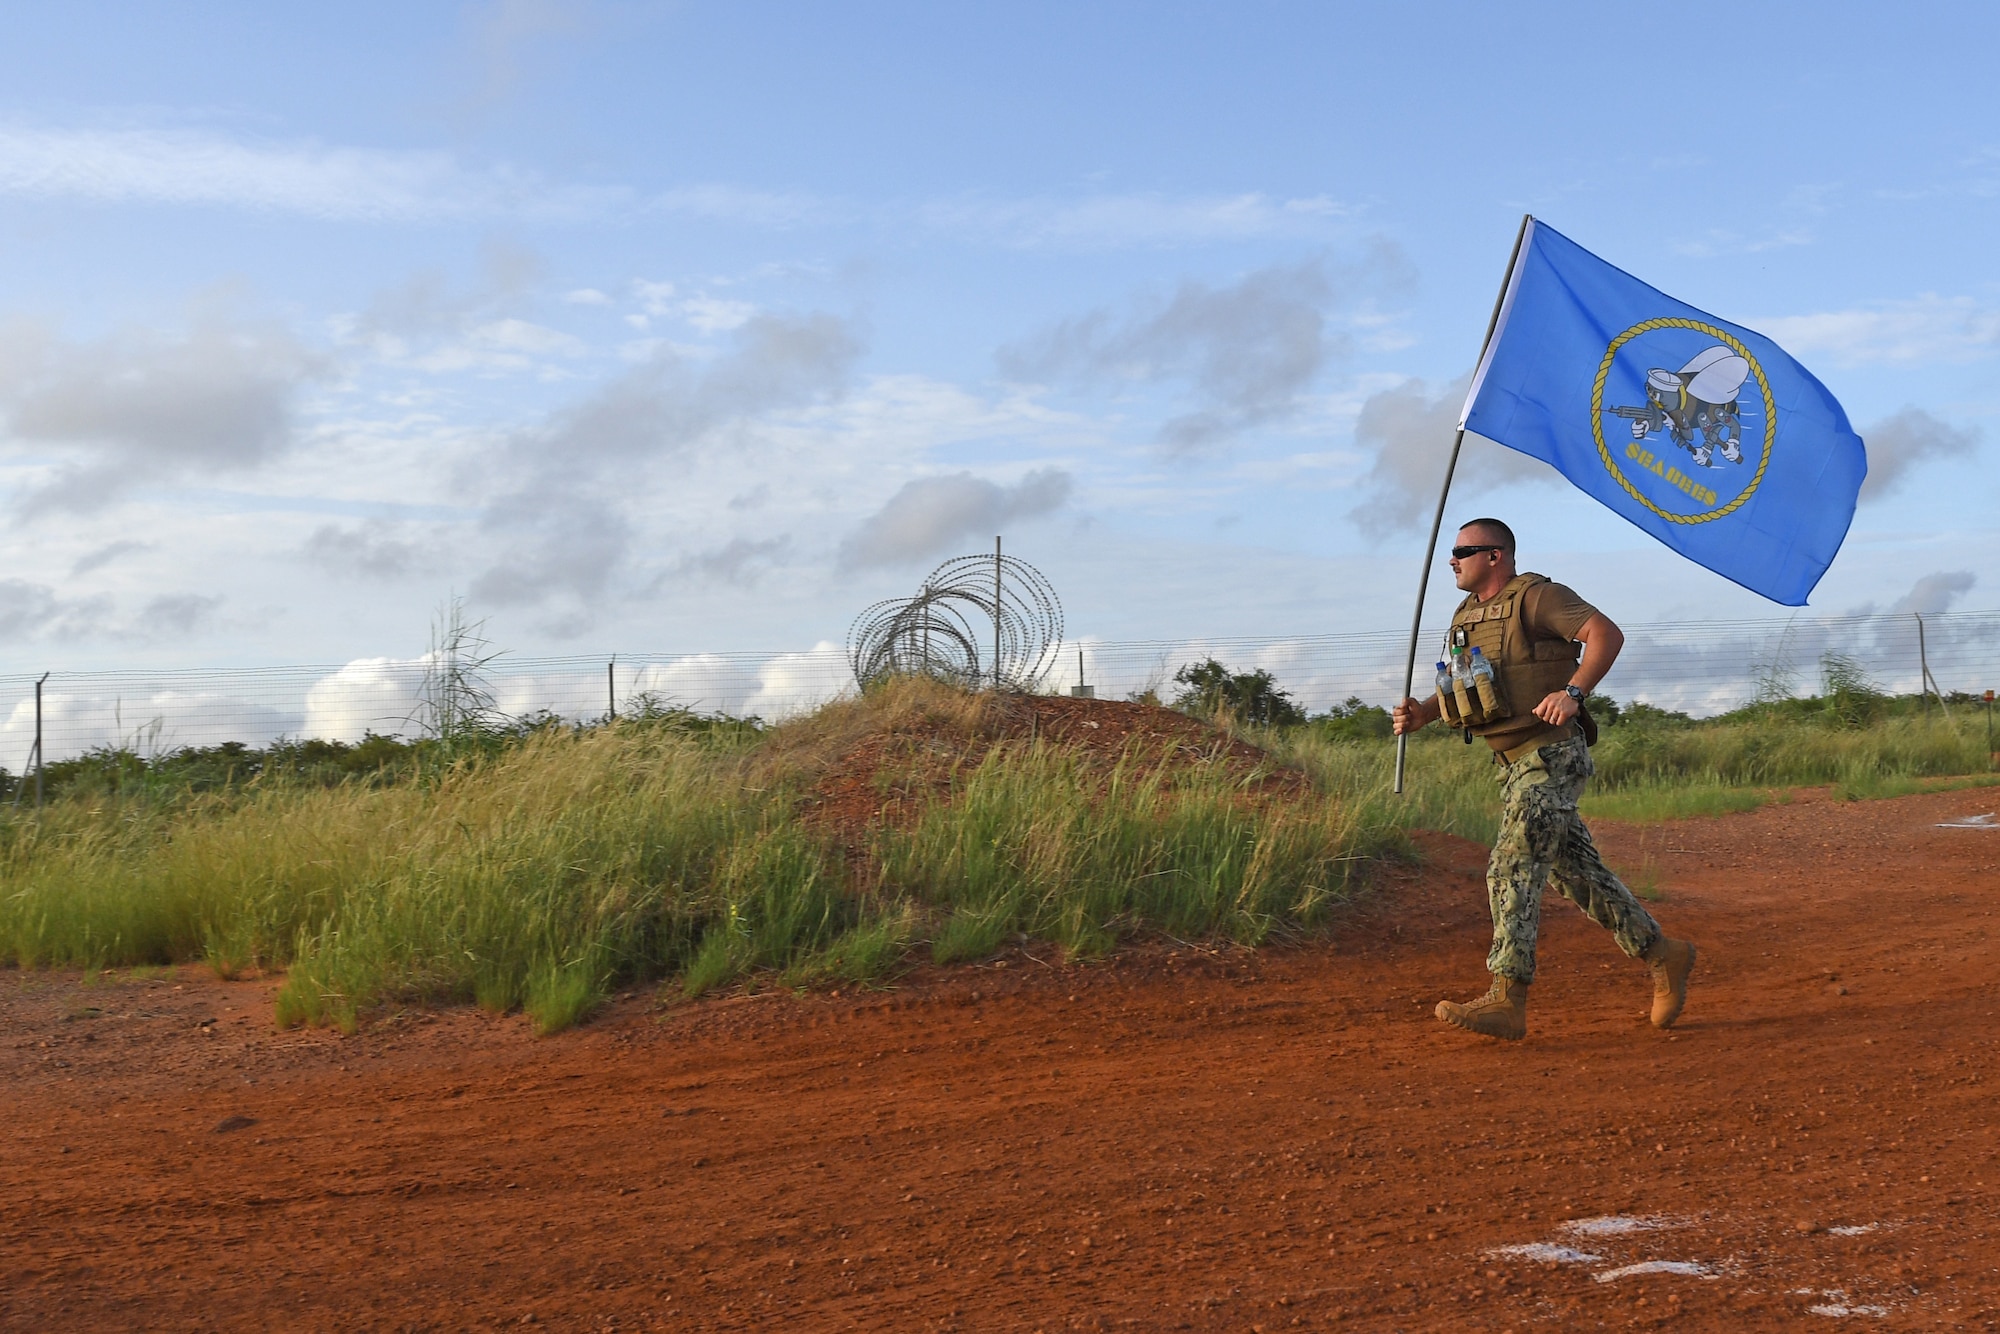 U.S. Air Force, Navy, and Army service members as well as Italian, French, German military members participated in a 9/11 Memorial 5K at Nigerien Air Base 101, Niamey, Niger, Sept. 11, 2018.